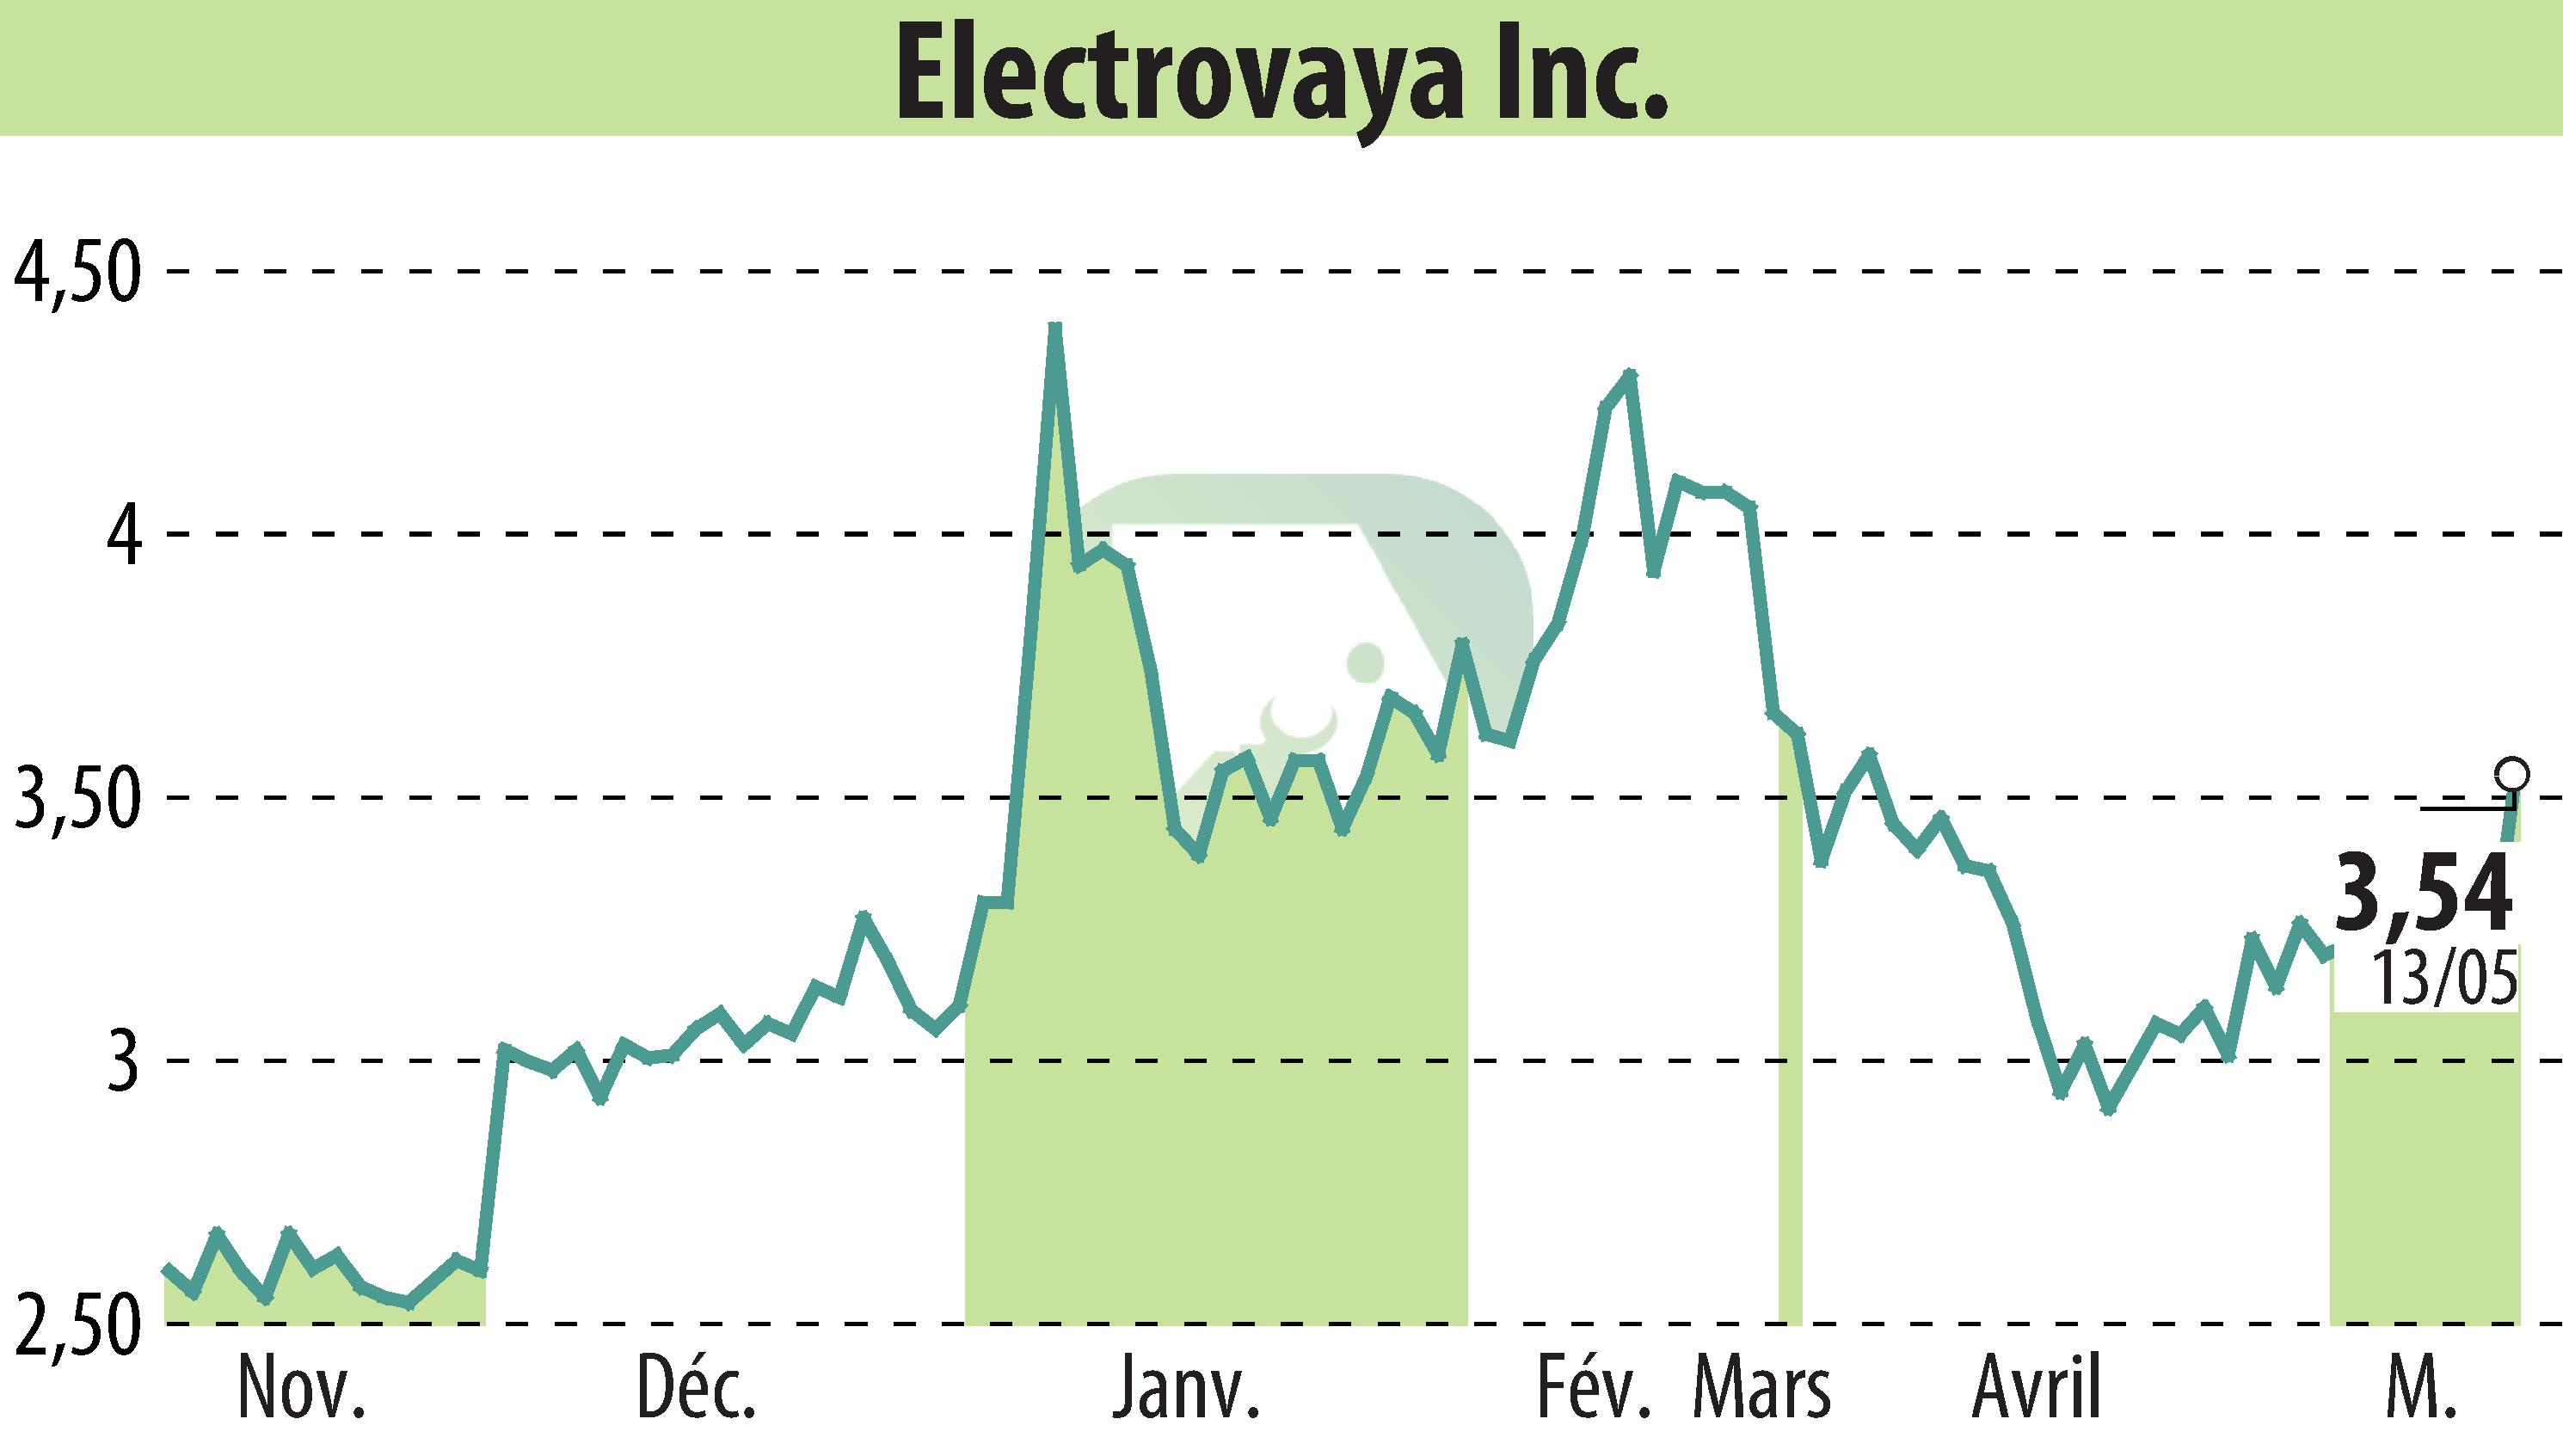 Stock price chart of Electrovaya, Inc. (EBR:ELVA) showing fluctuations.